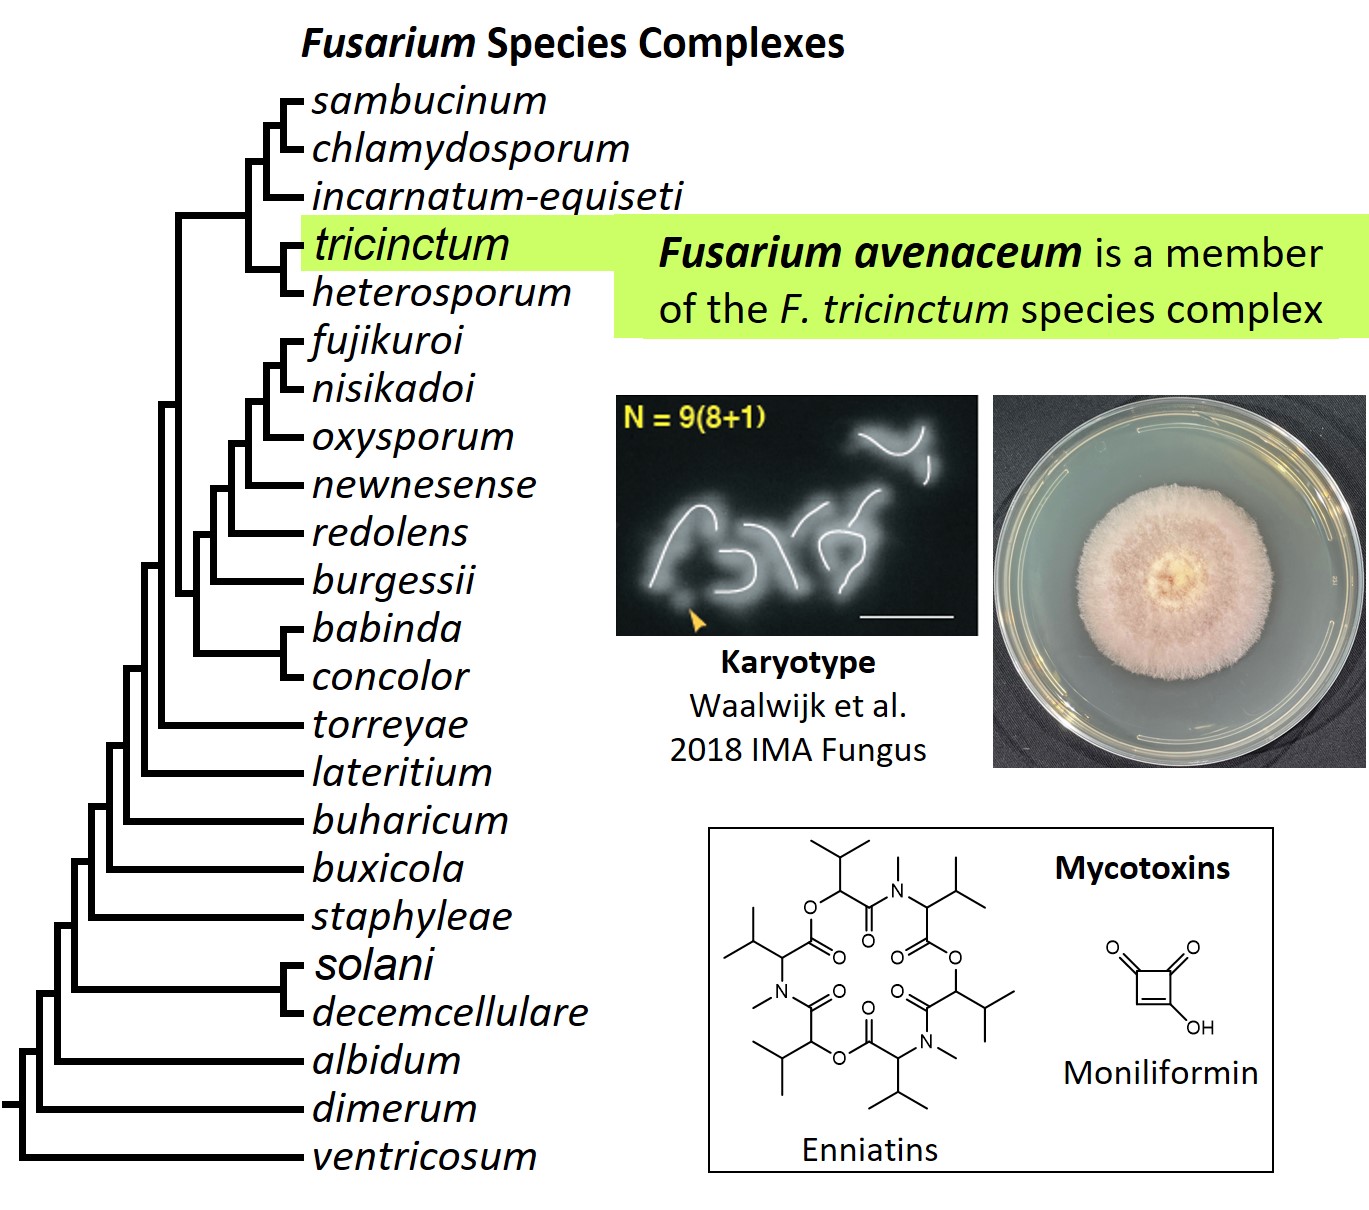 Left – tree showing phylogenetic relationships of the 23 Fusarium species complexes and placement of F. avenaceum within the F. tricinctum species complex. In the tree, species complex names are abbreviated using specific epithets of the species after which the complexes are named (e.g., the F. sambucinum species complex is abbreviated as sambucinum). Middle left – karyotype of F. avenaceum. Middle right – culture of F. avenaceum strain NRRL 54939 growing on potato dextrose agar medium. Bottom – chemical structures of enniatins and moniliformin, two mycotoxins produced by F. avenaceum. Image credit: Robert H. Proctor, Amy McGovern and Crystal Probyn.